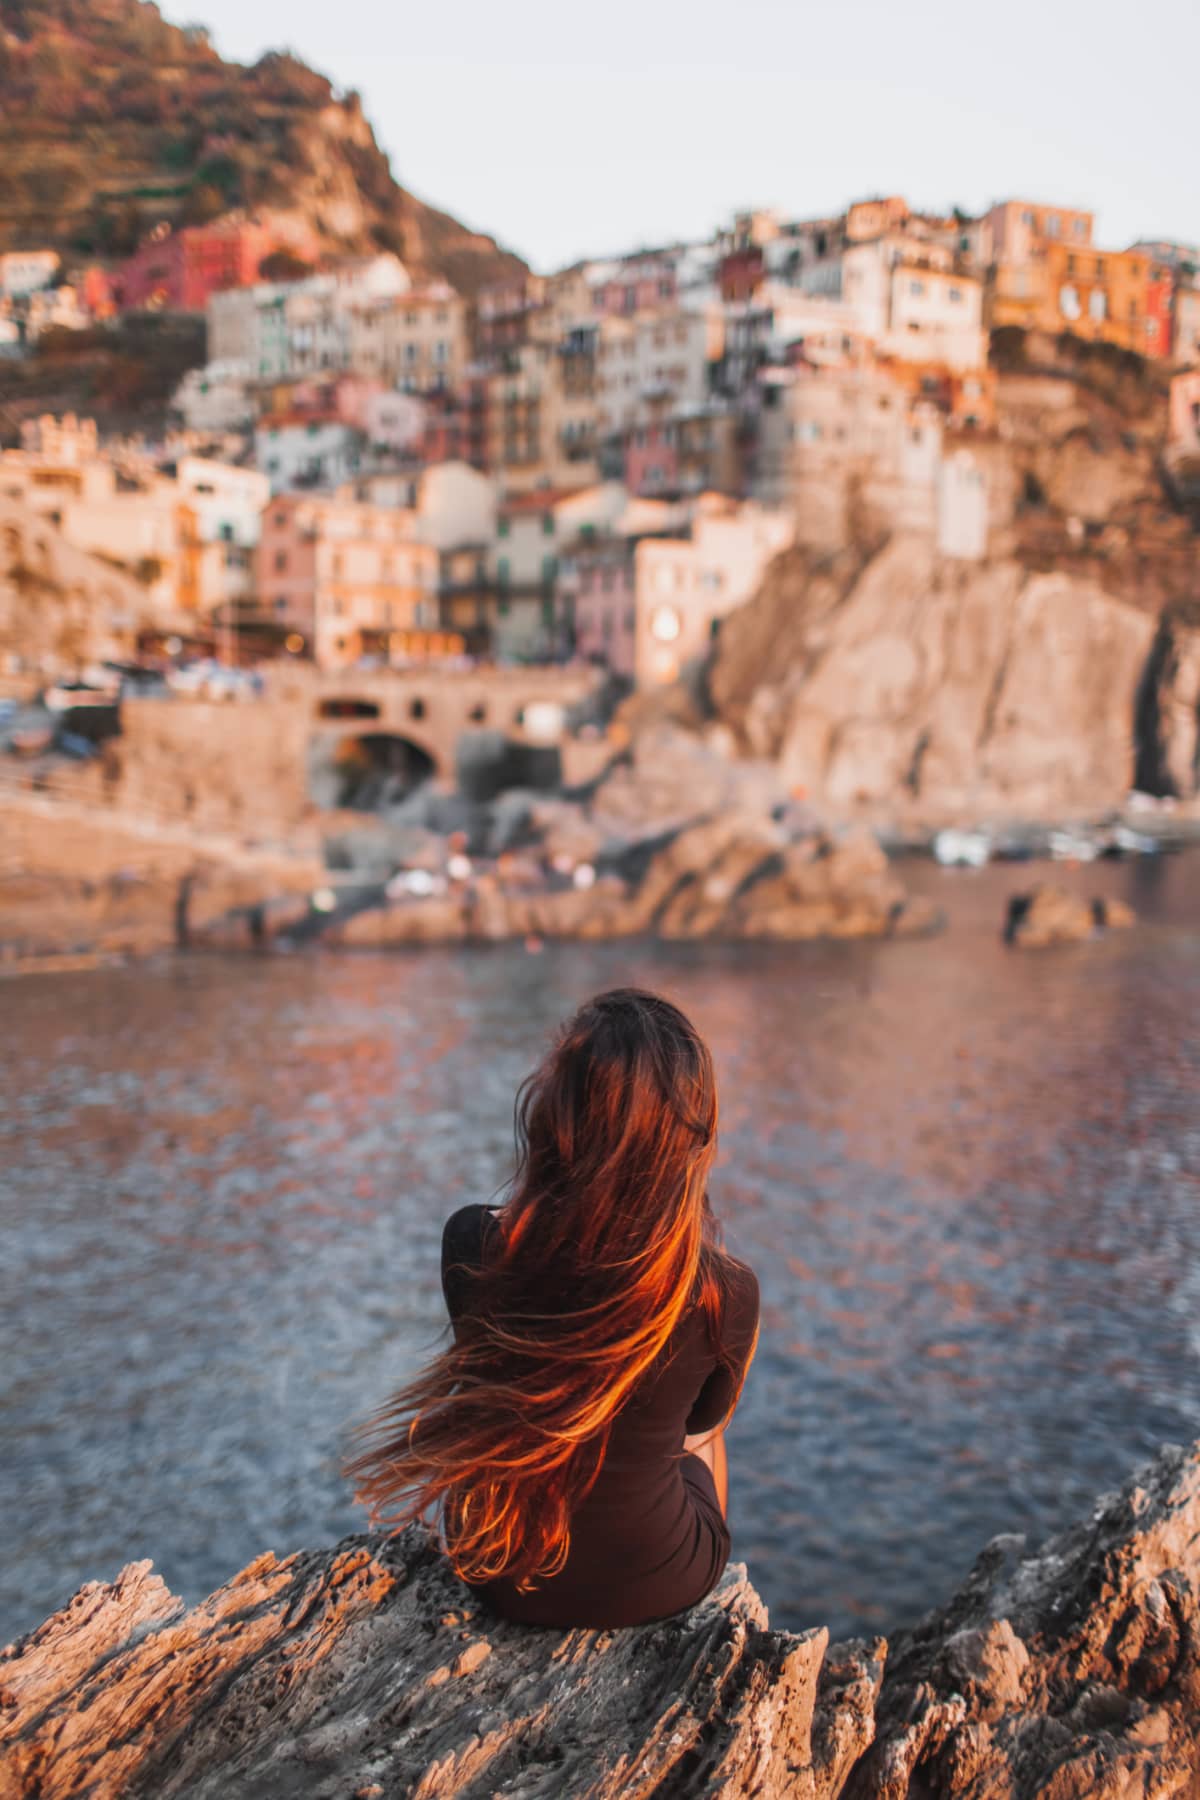 Woman traveling alone enjoys the cliffside view of a nearby town